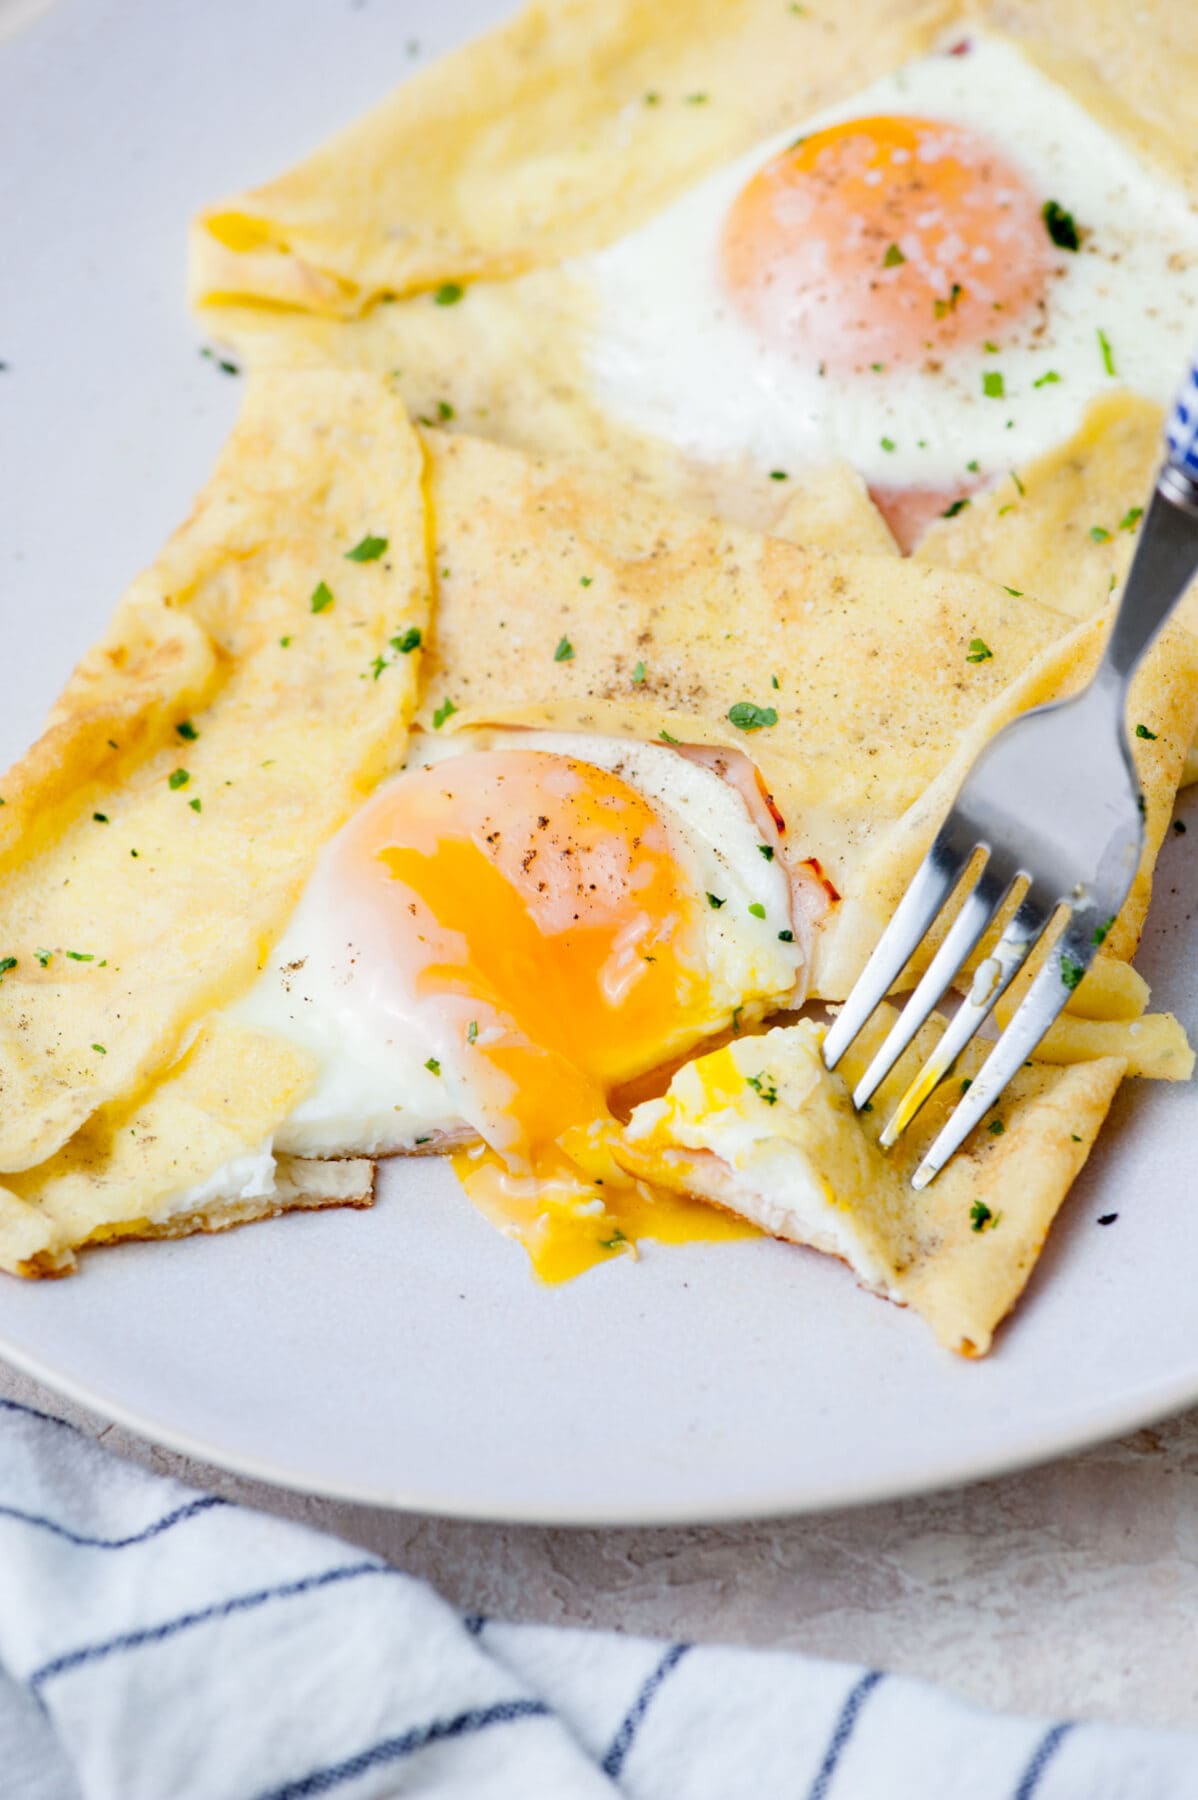 A savory crepe with egg, ham, and cheese is being stuck on a fork.